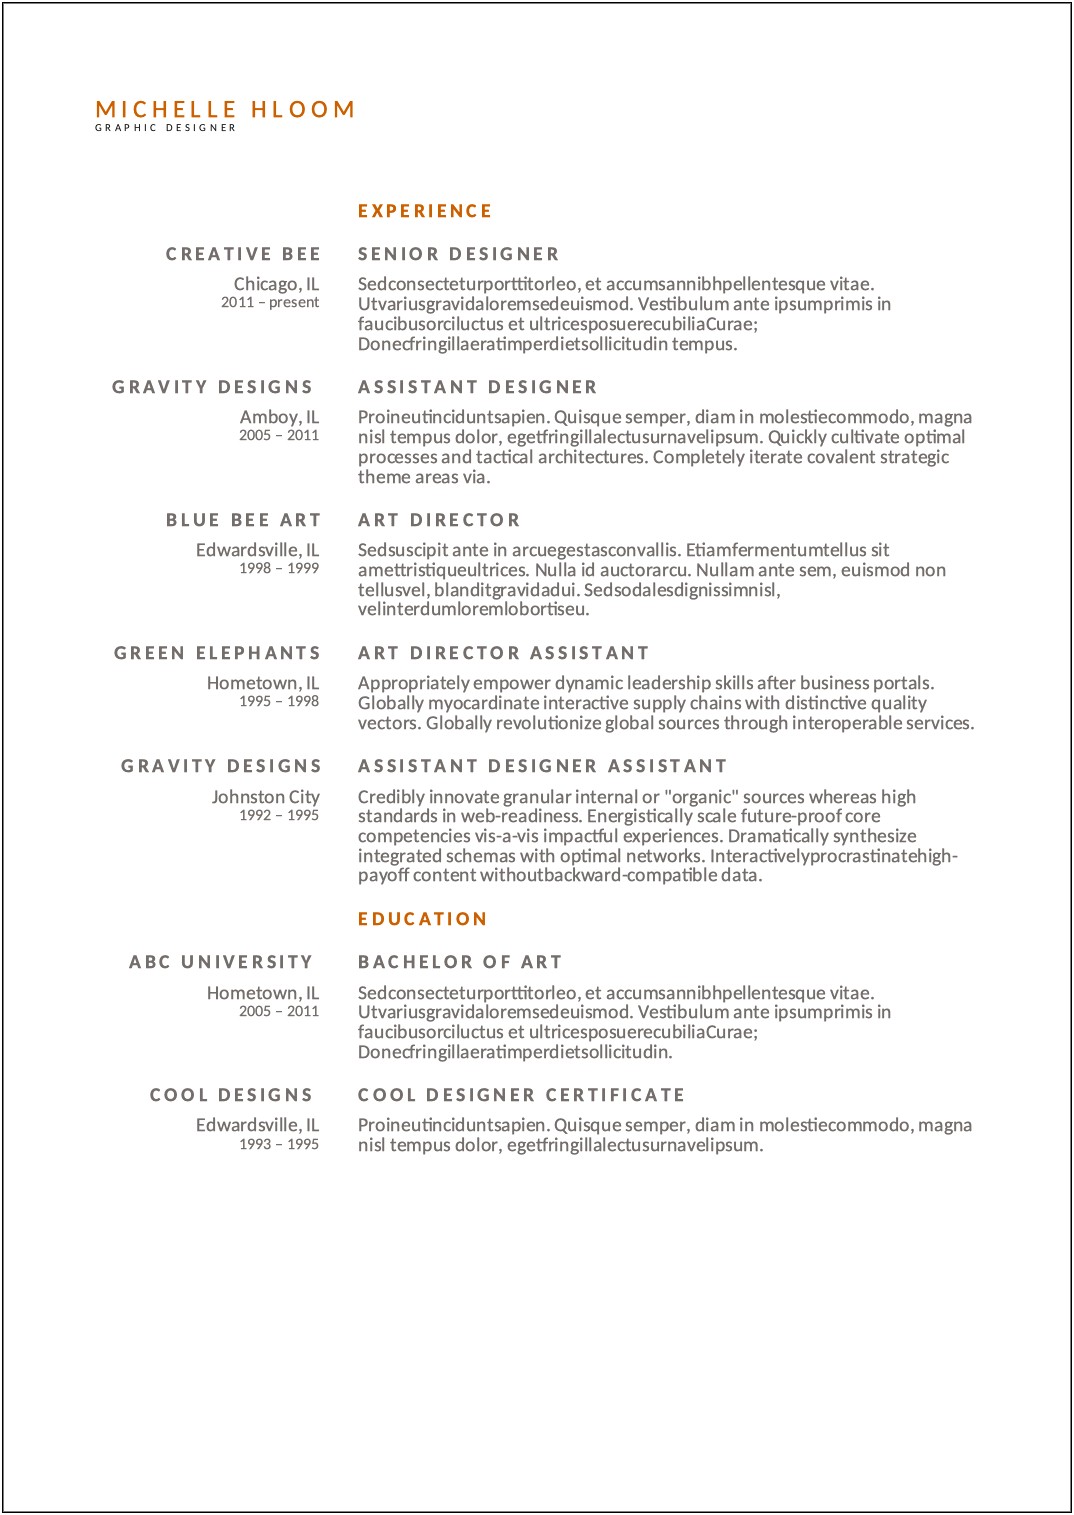 Best Free Resume Templates For Developers